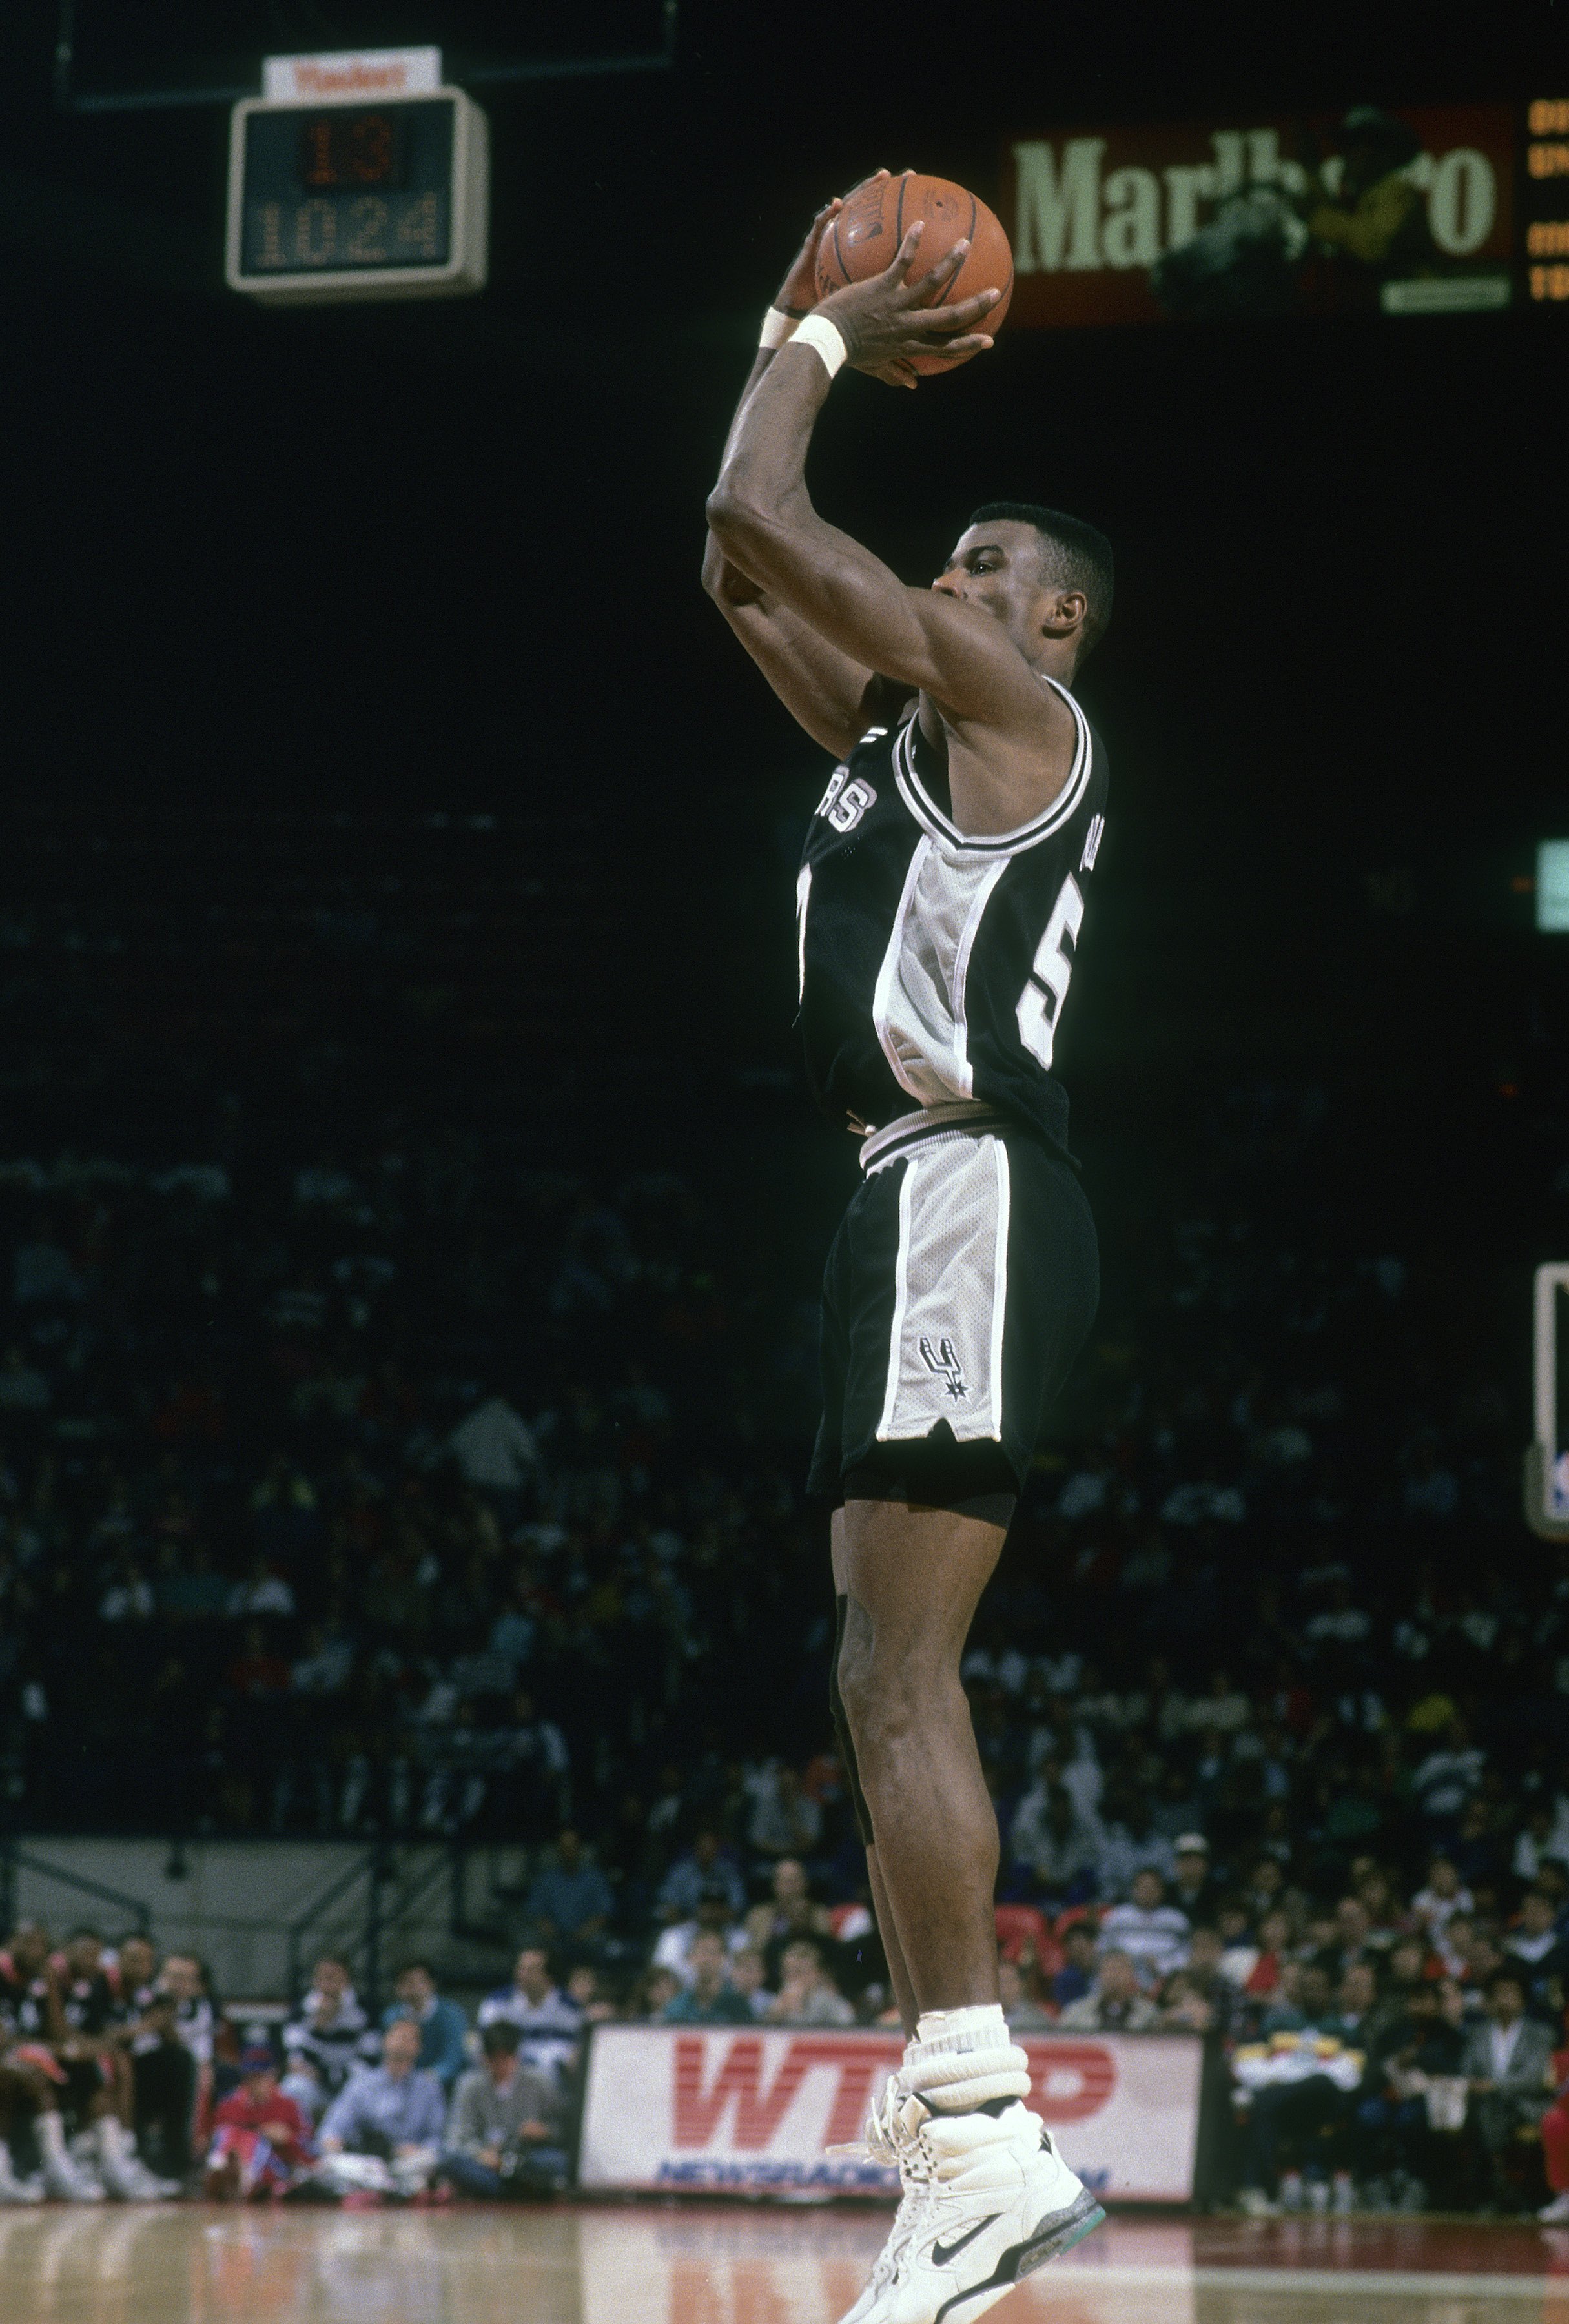 This is a photo of David Robinson of the Spurs.